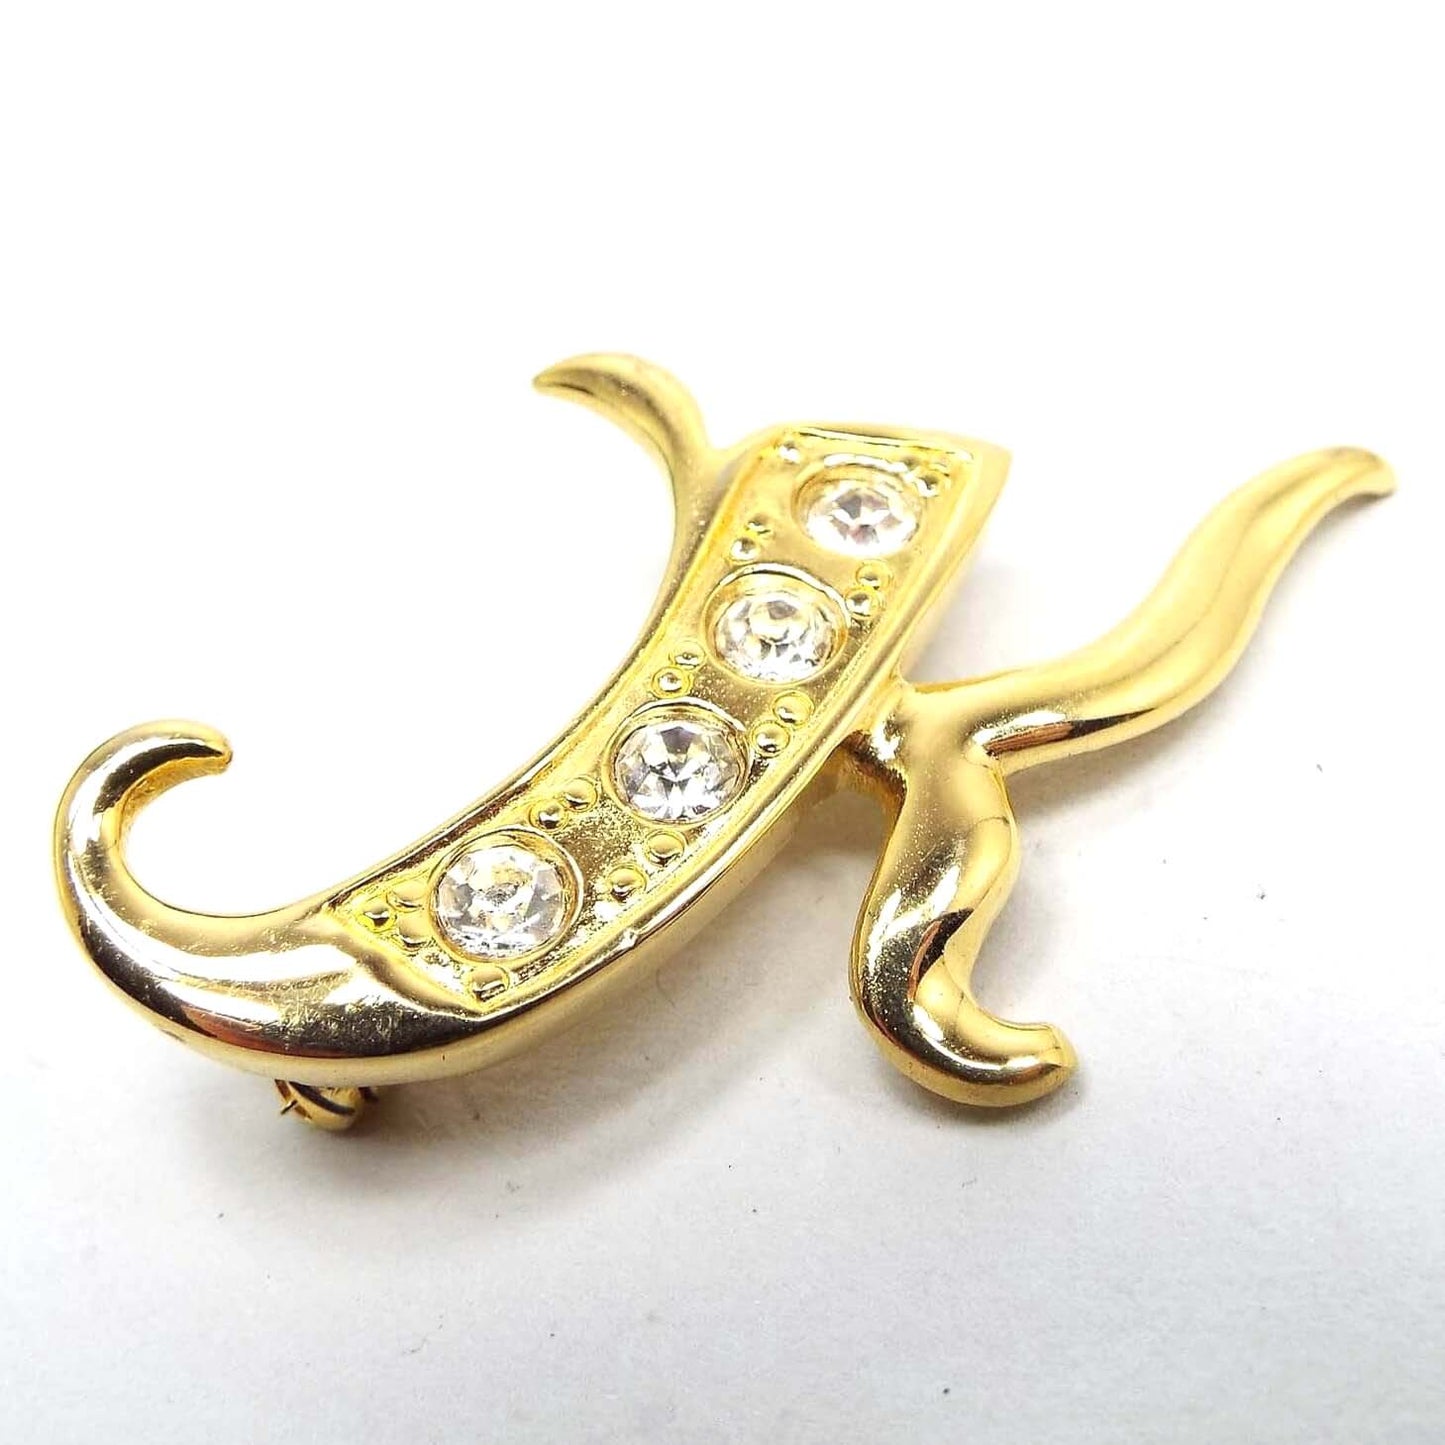 Front view of the retro vintage rhinestone initial brooch pin. The brooch is shaped like a curvy initial letter K and has four clear round rhinestones on the left part of the brooch.